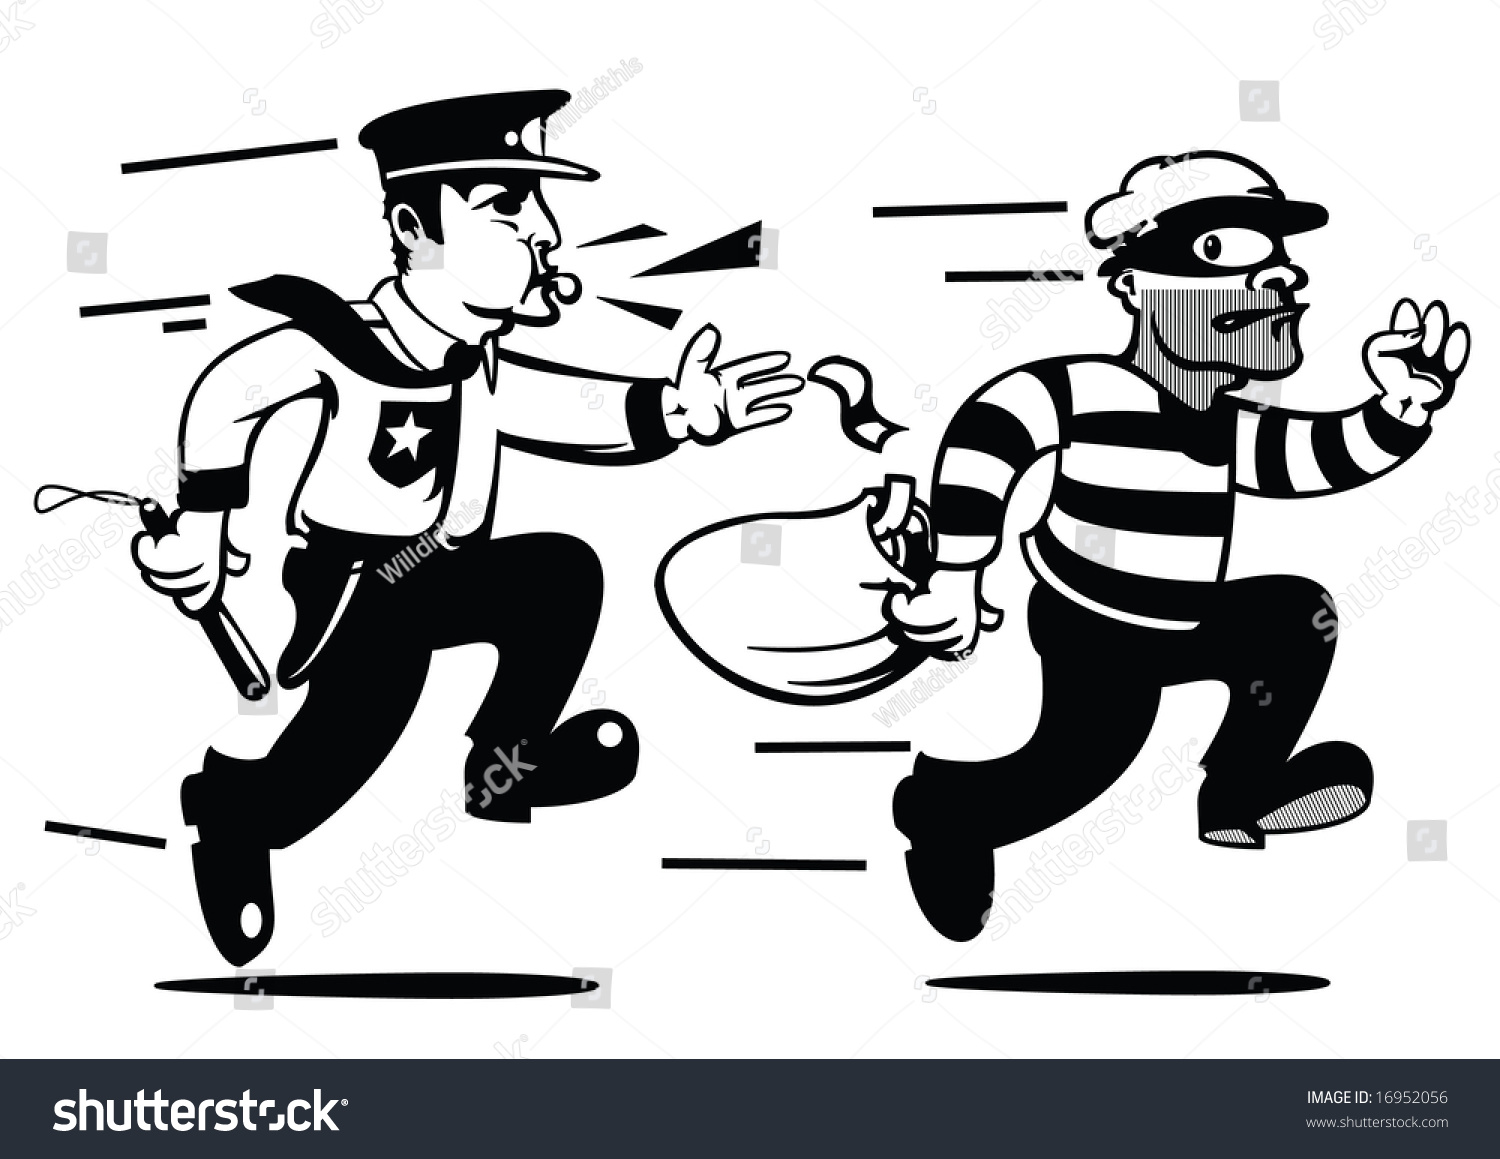 free clipart bank robber - photo #38